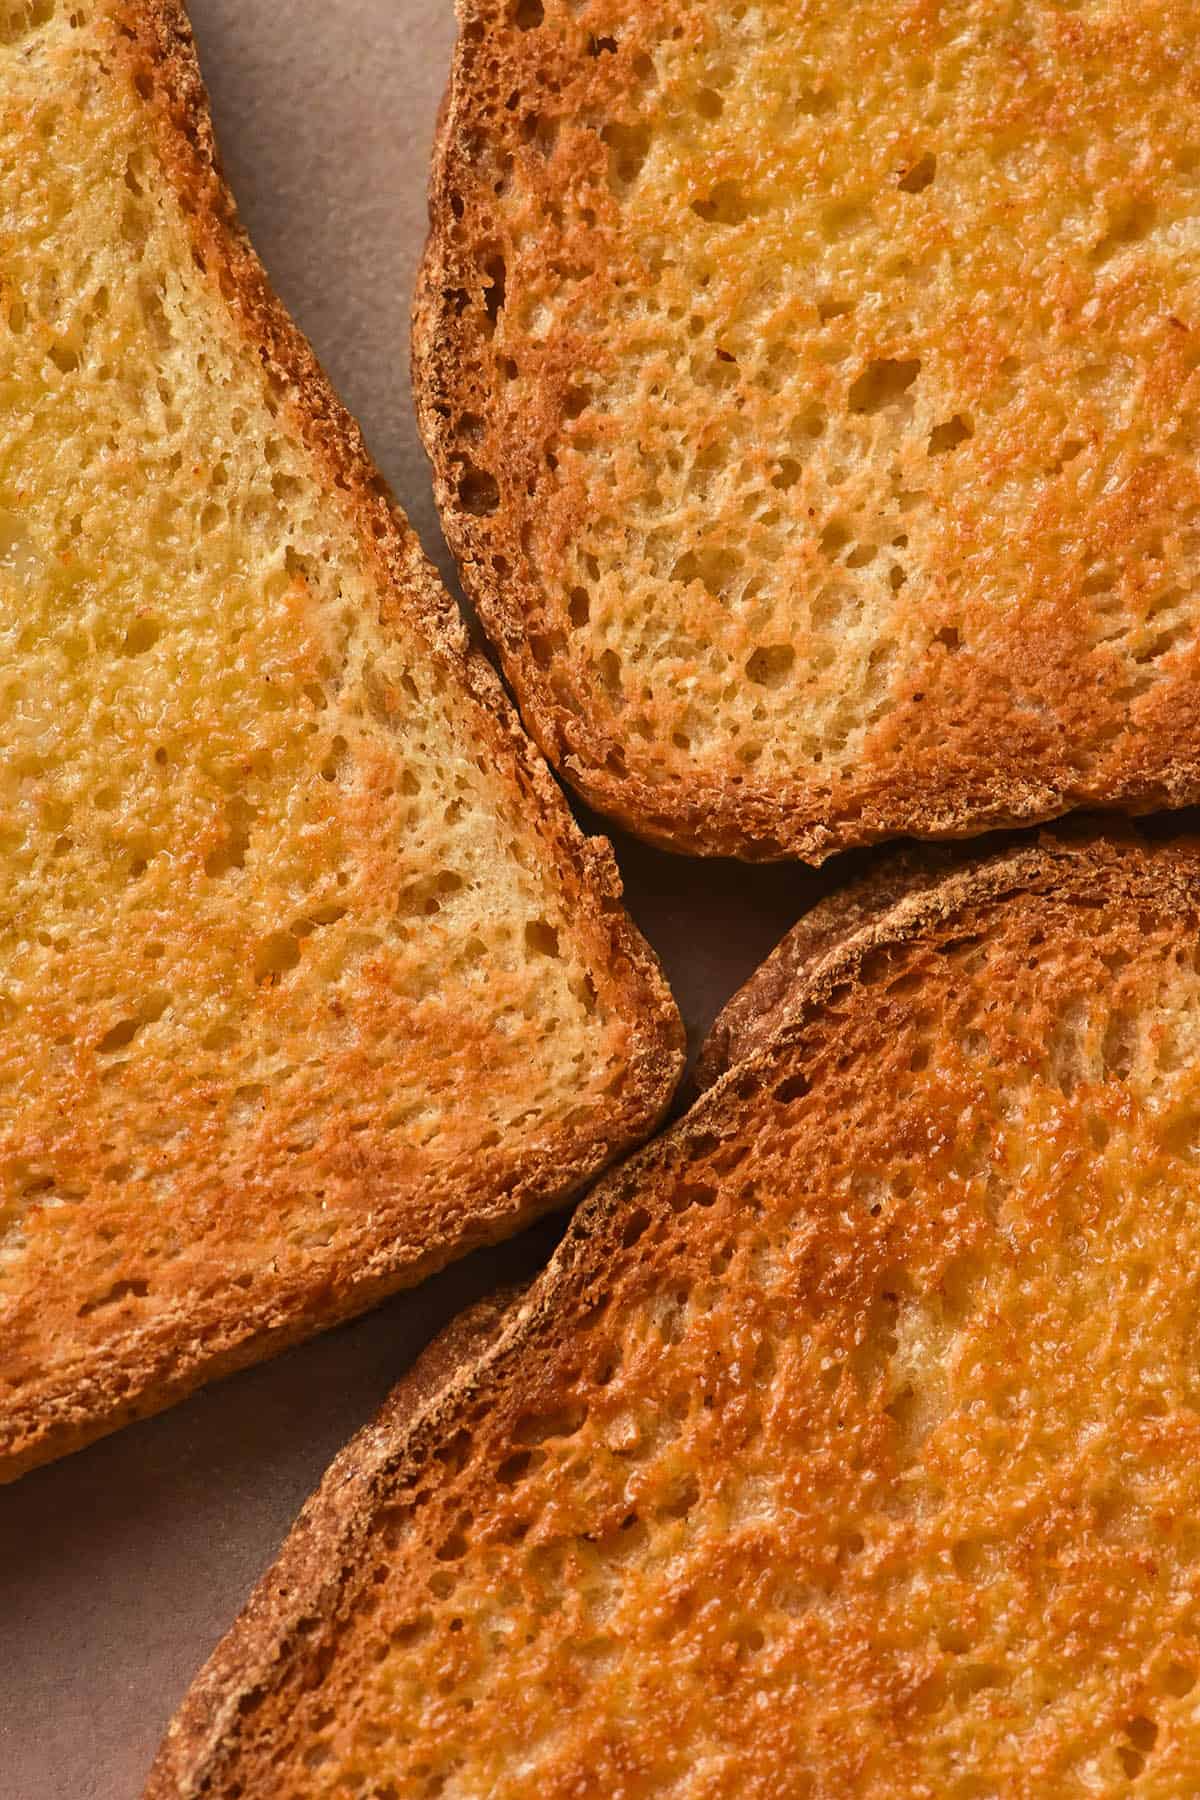 An aerial close up photo of three pieces of golden brown toasted grain free bread on a pale pink ceramic plate. The toast has been slathered with butter which has melted into the crumb